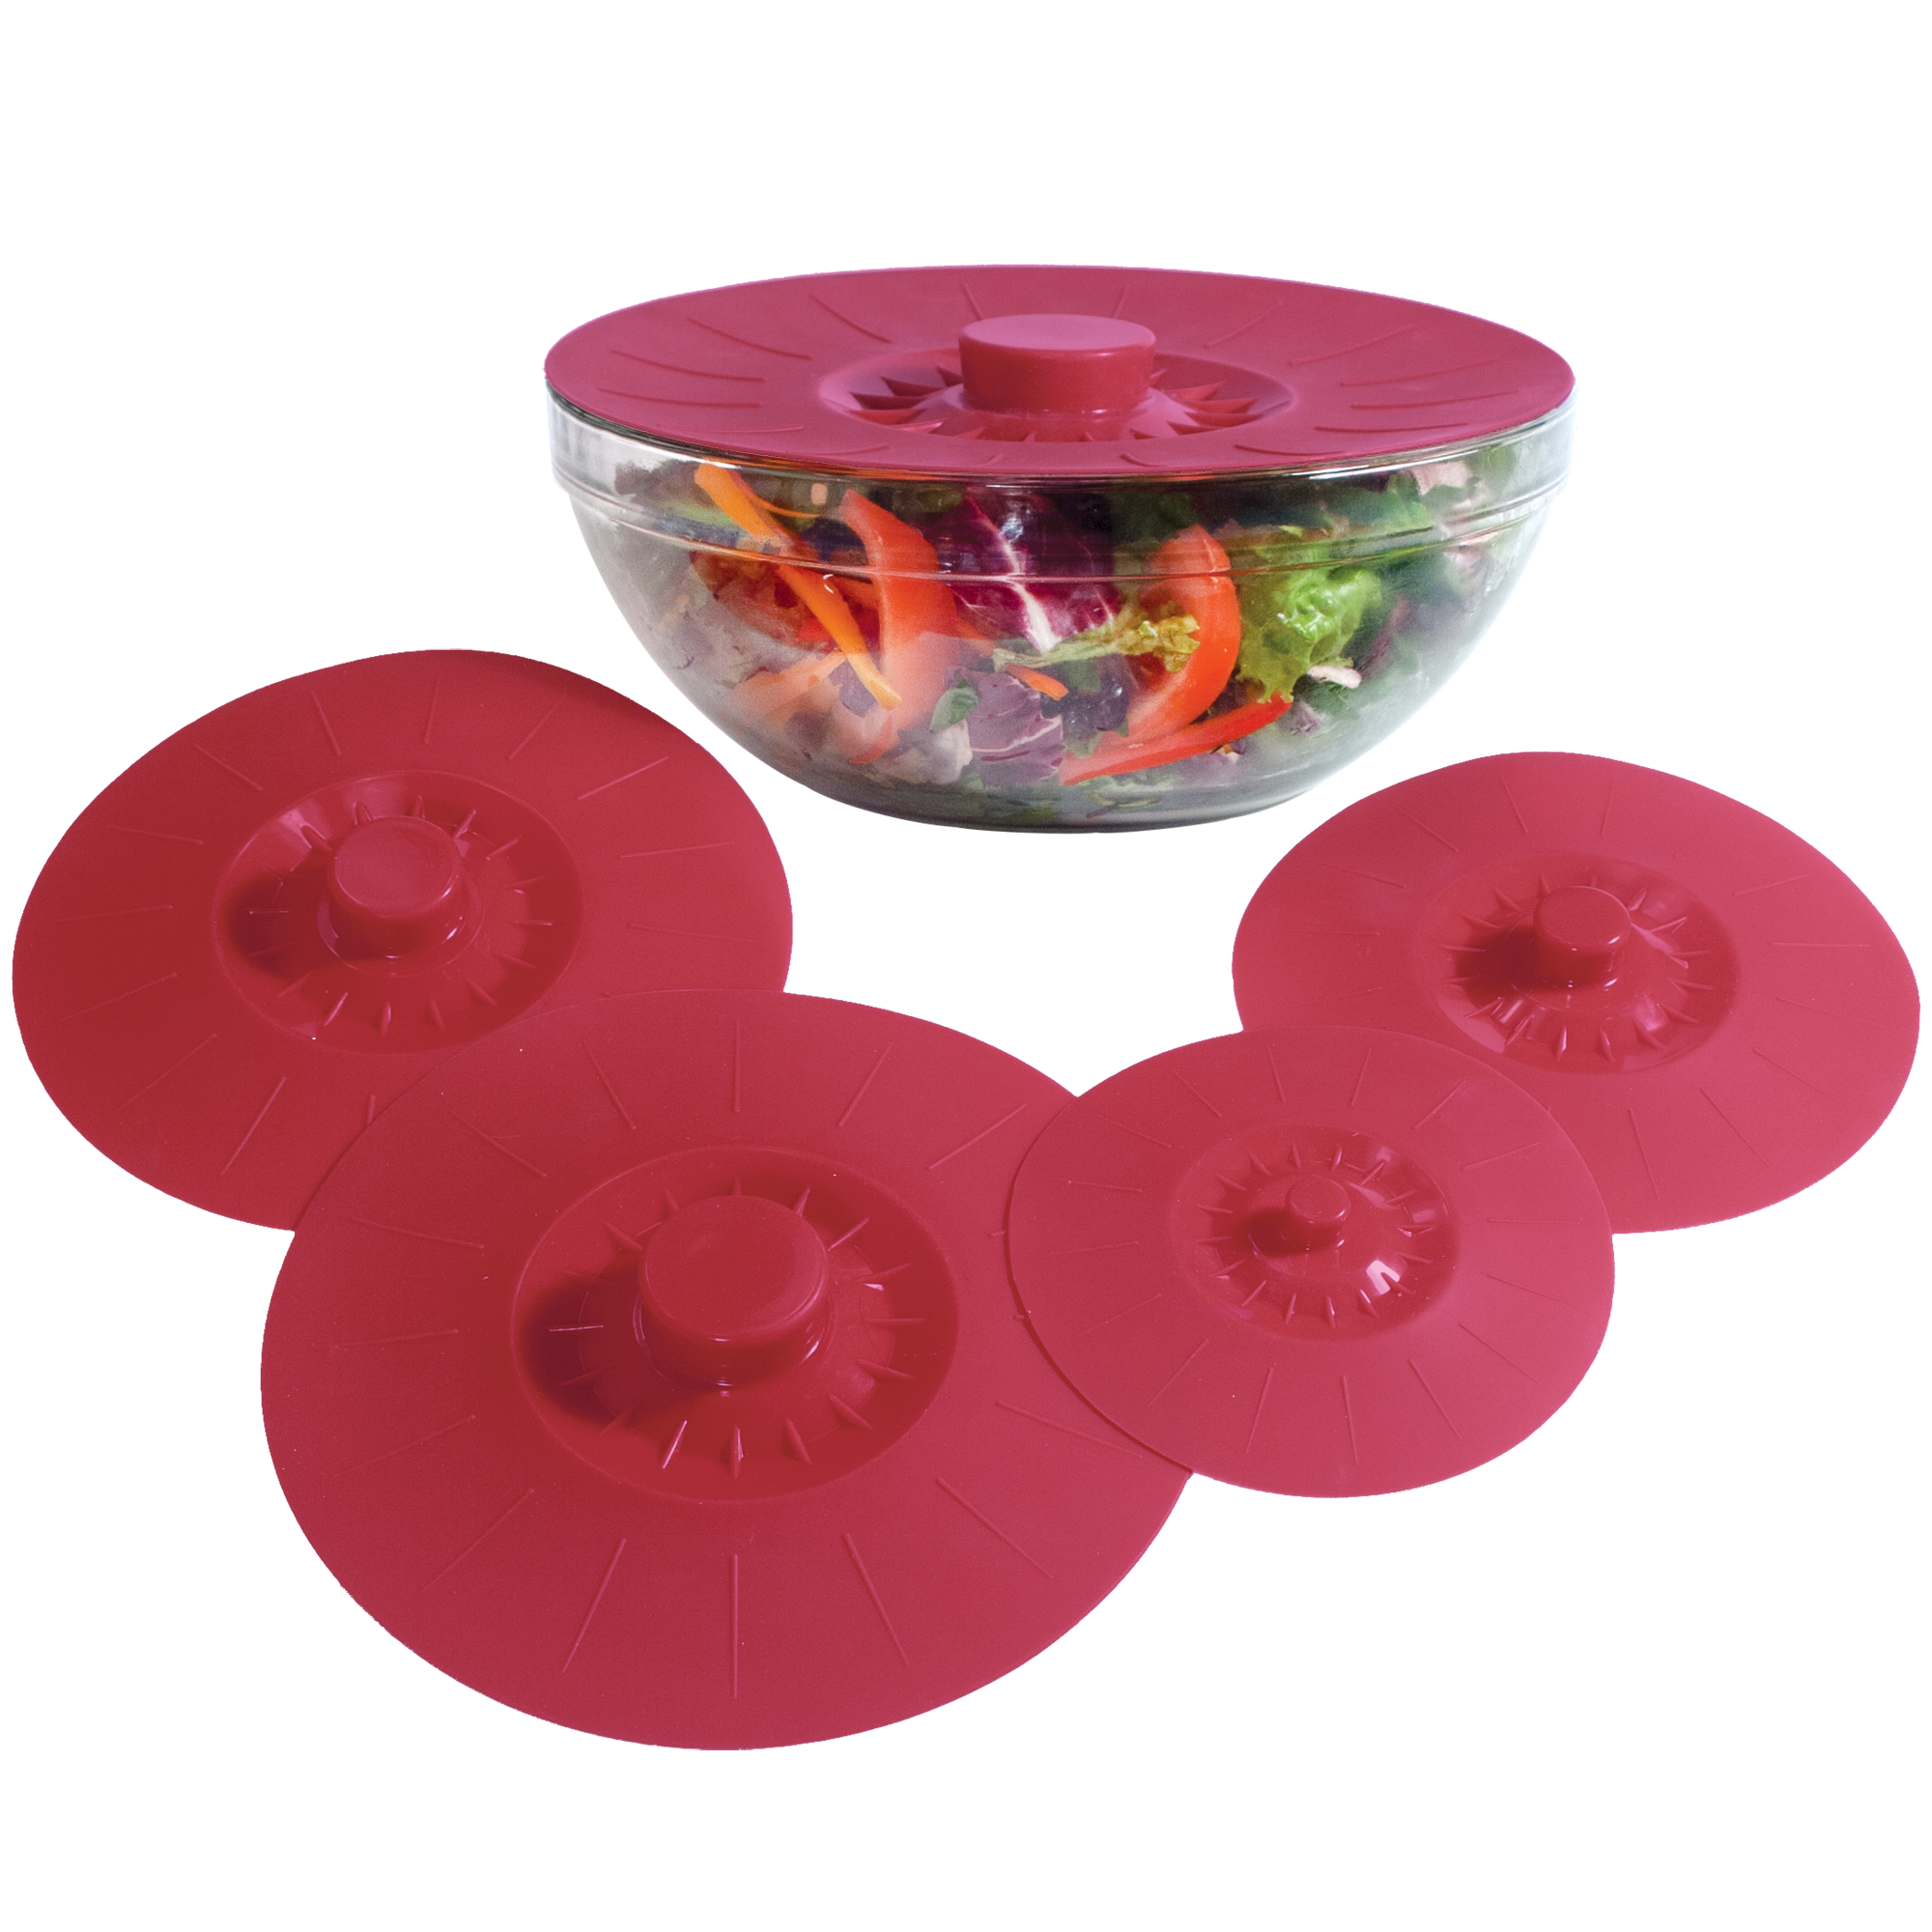 Silicone Suction Lids, Microwave Covers (Set of 5, Various Sizes